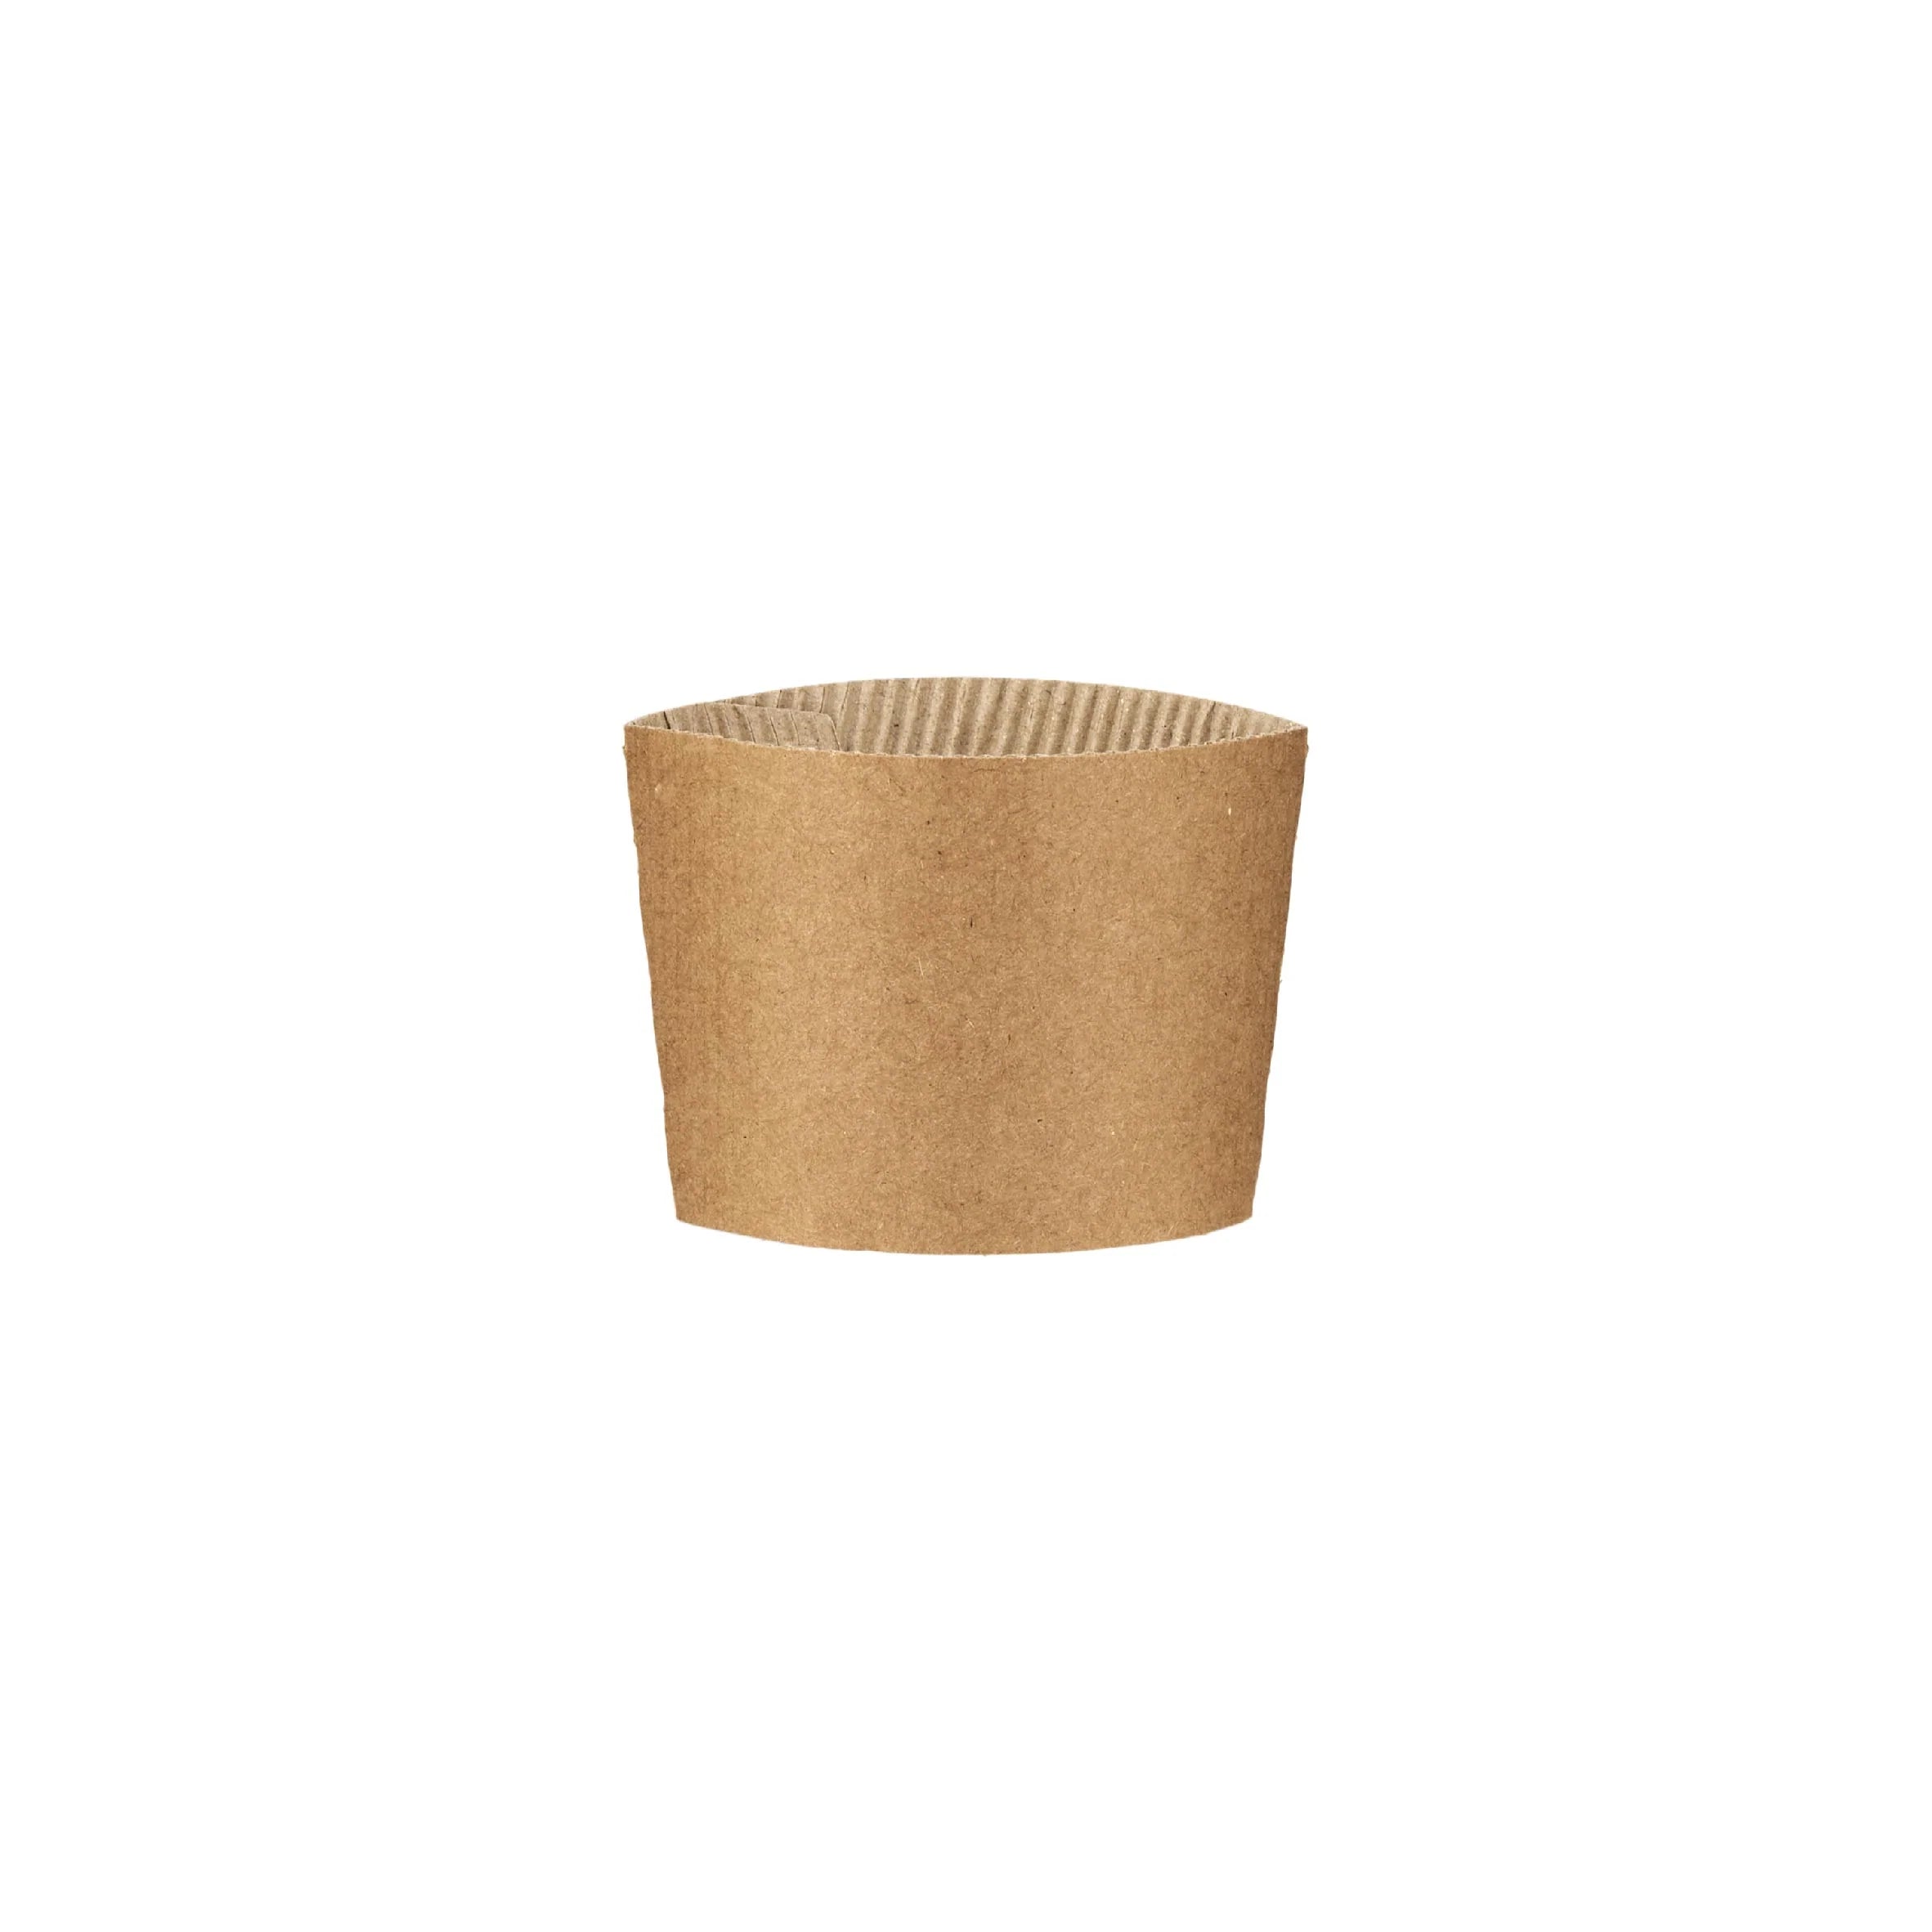 8 Oz (237ml) Paper Hot Sleeve| 1000 Pieces - Hotpack Bahrain